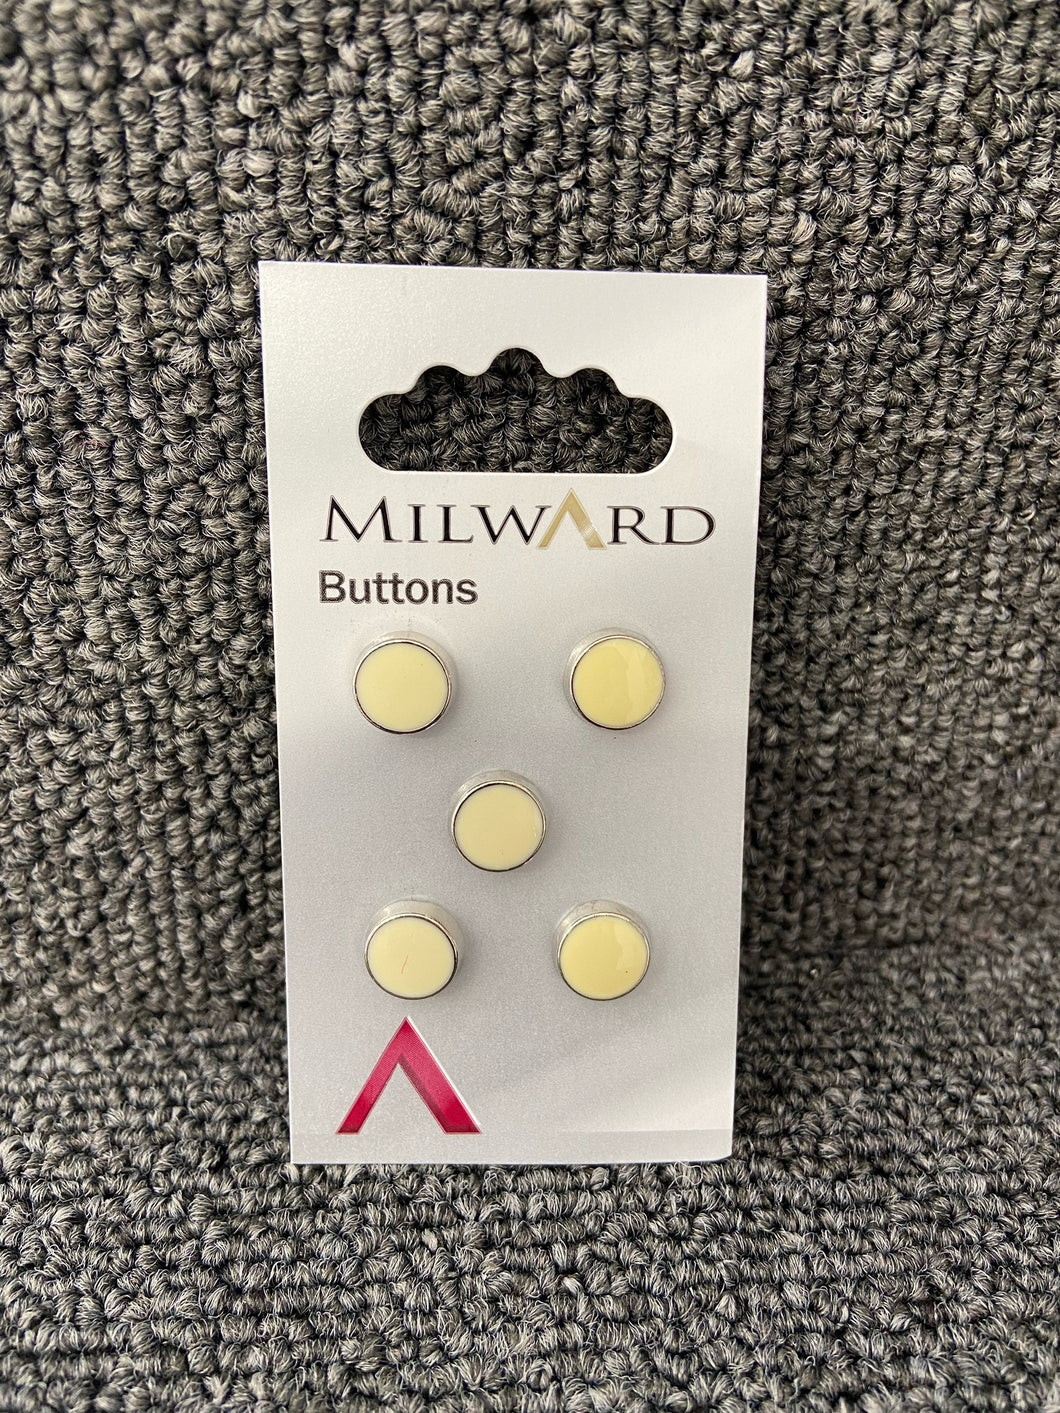 milward button buttons Cream Silver Rimmed 10mm Shank Pack of 5 Code G 01274